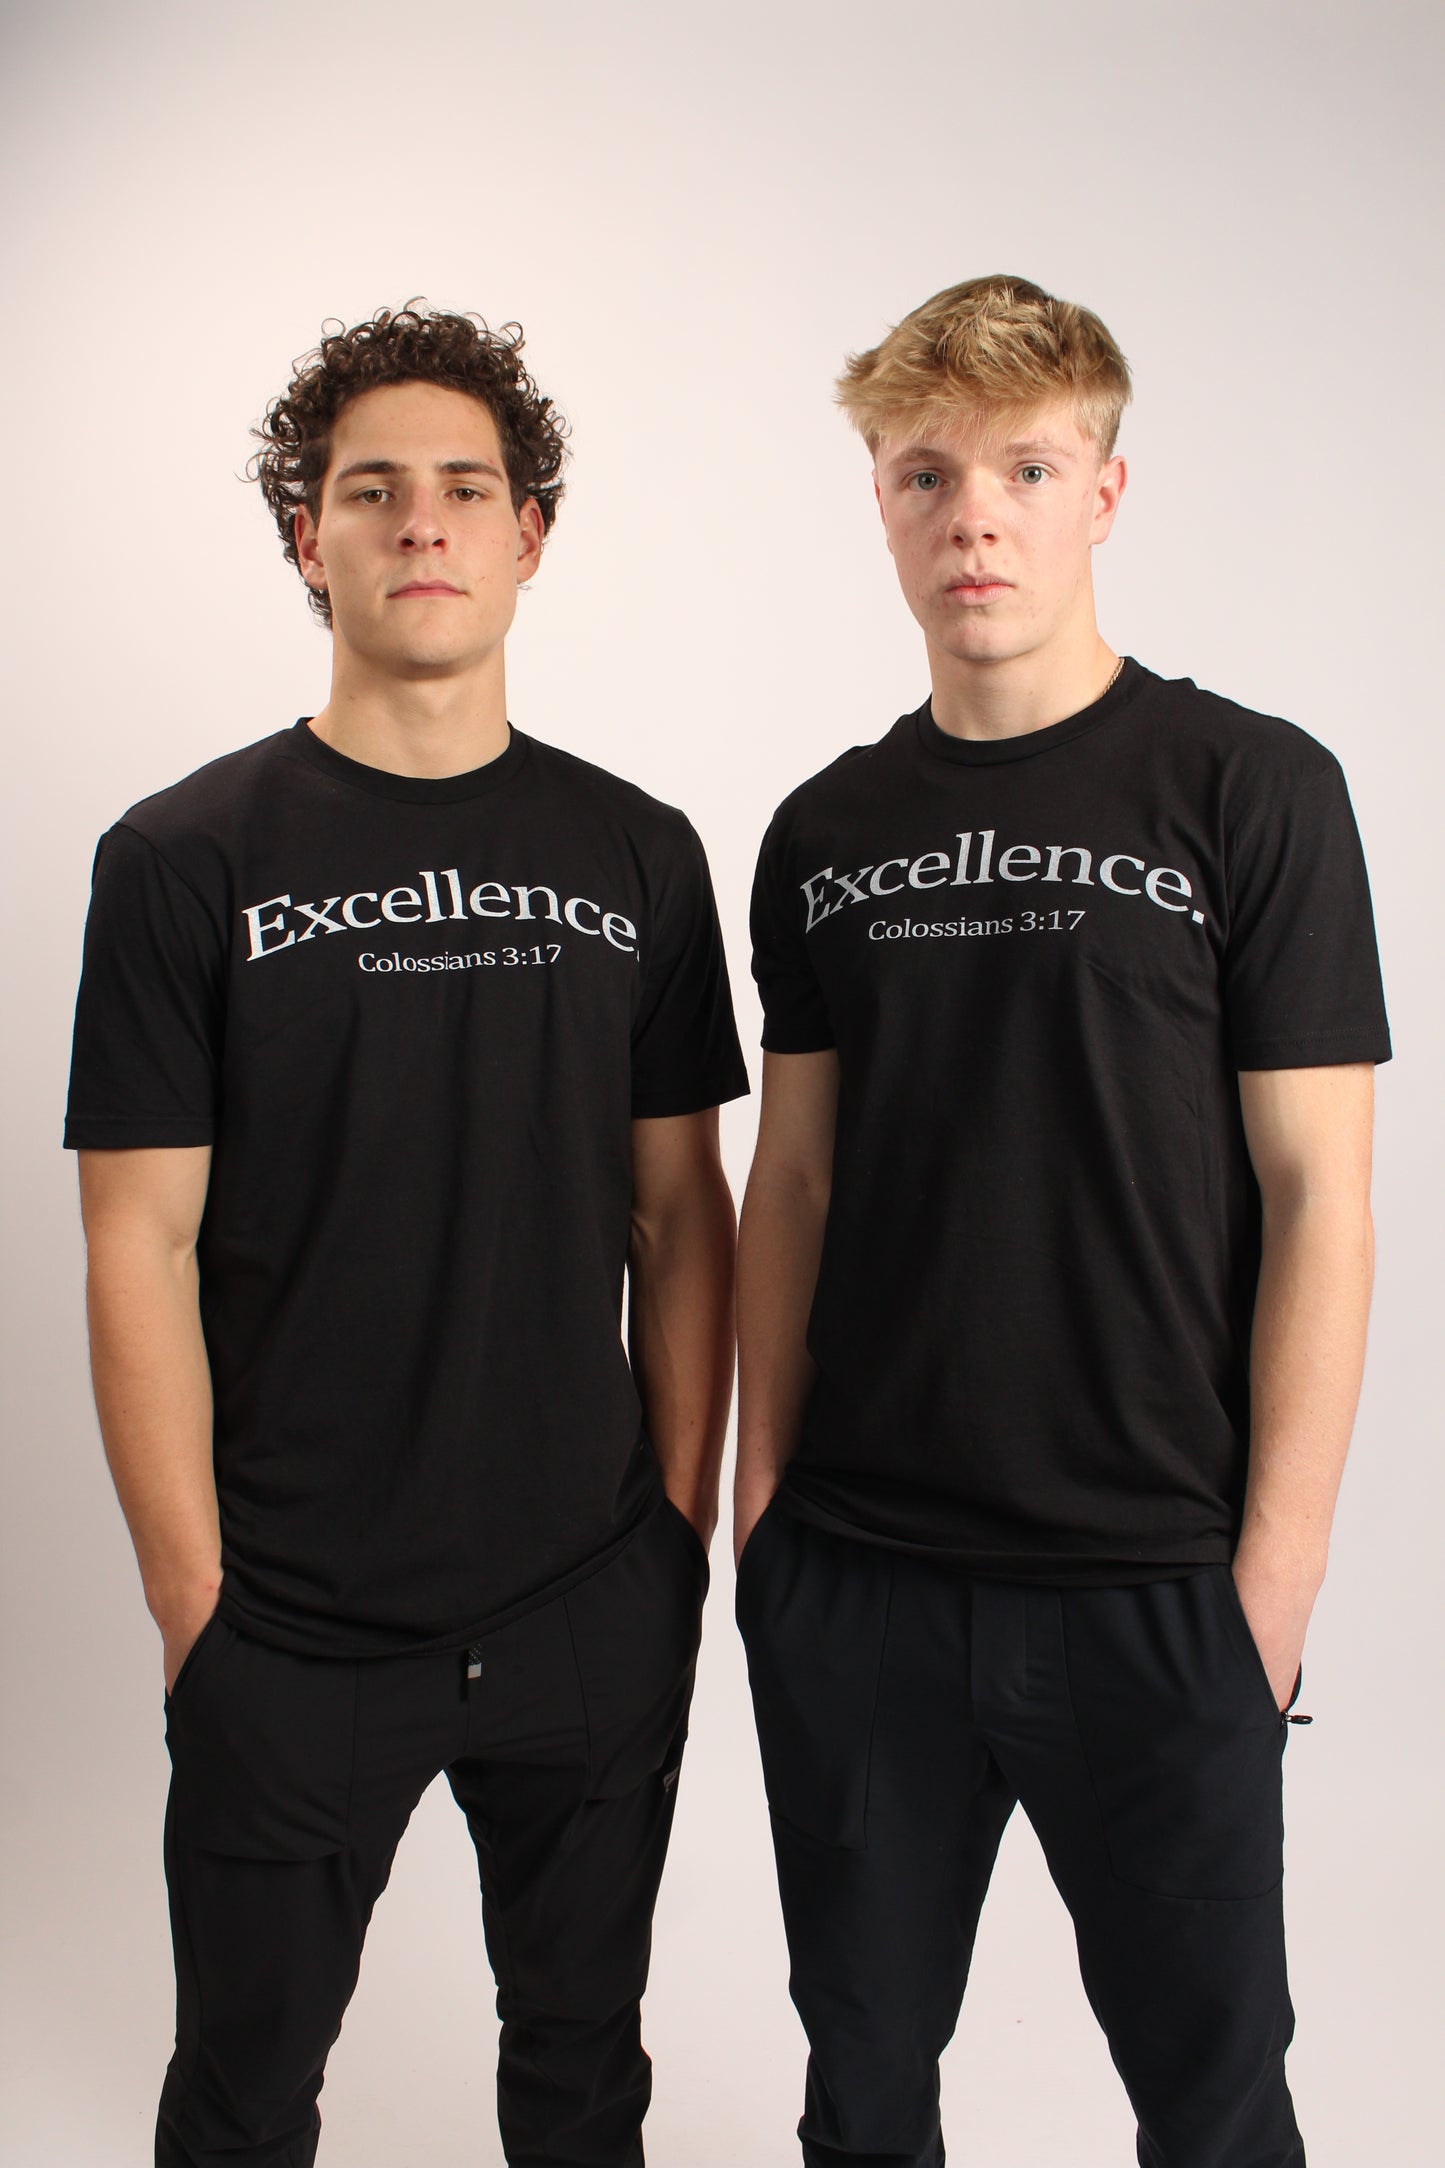 "Excellence" Slim-Fit T-shirt